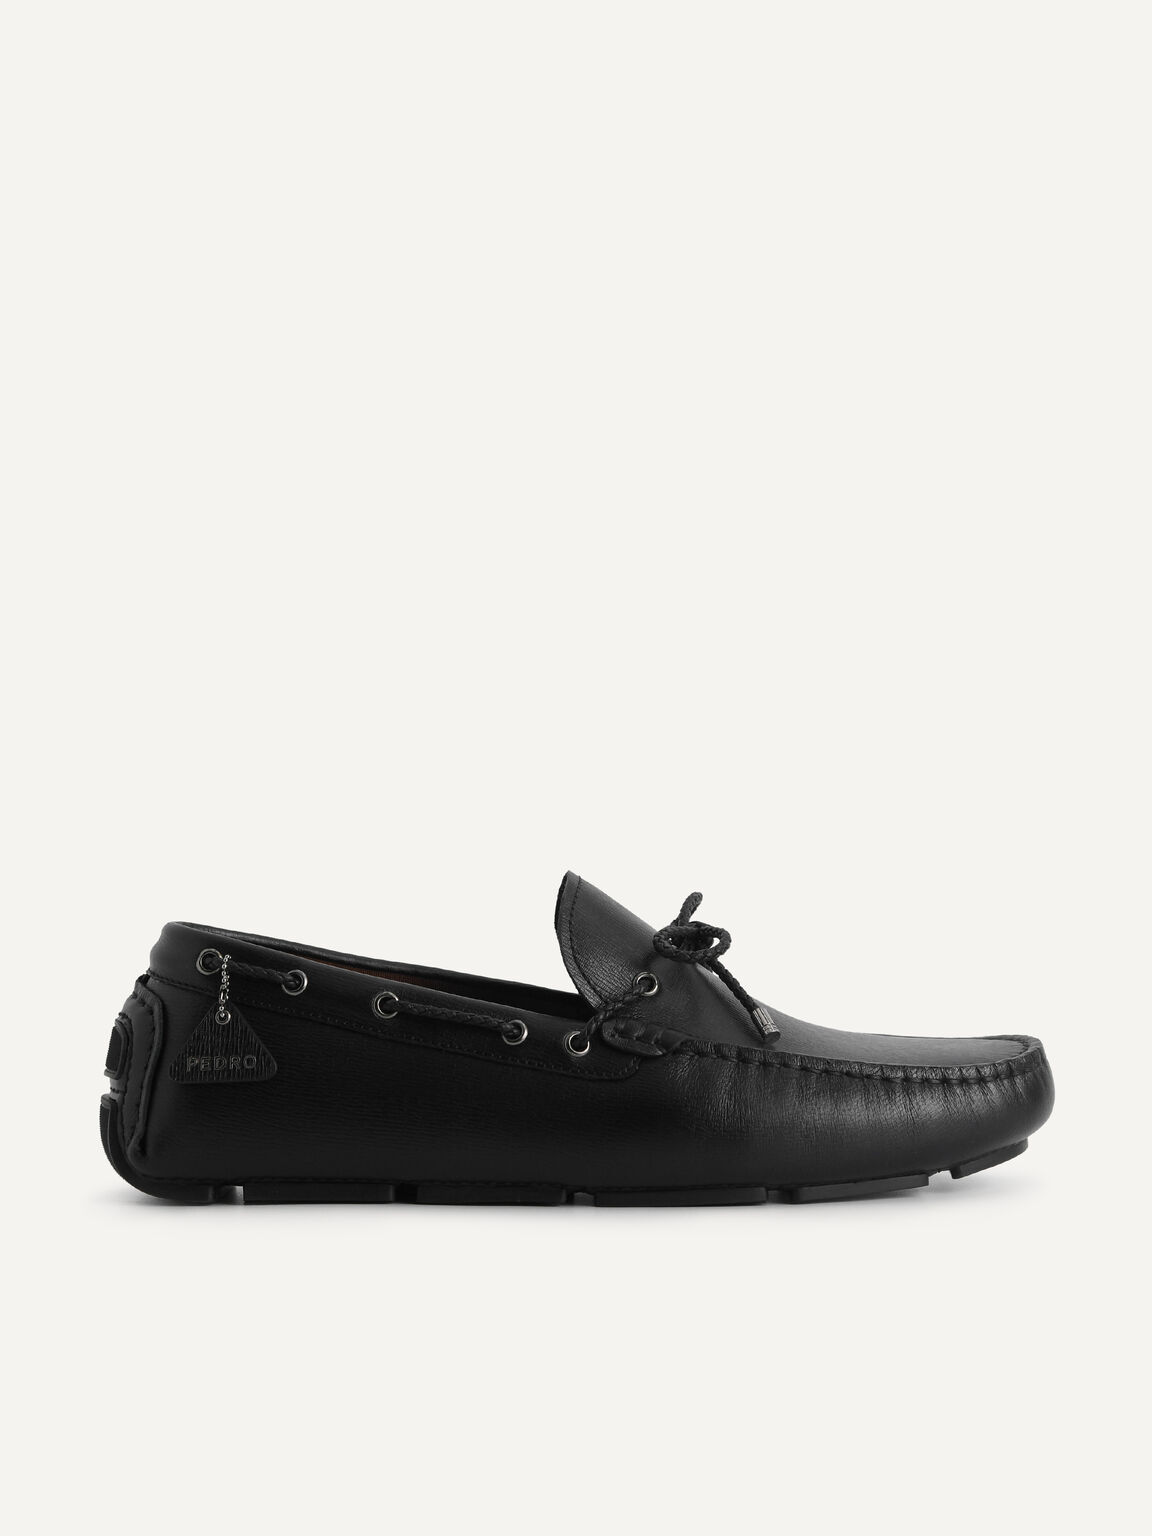 Textured Leather Moccasins, Black